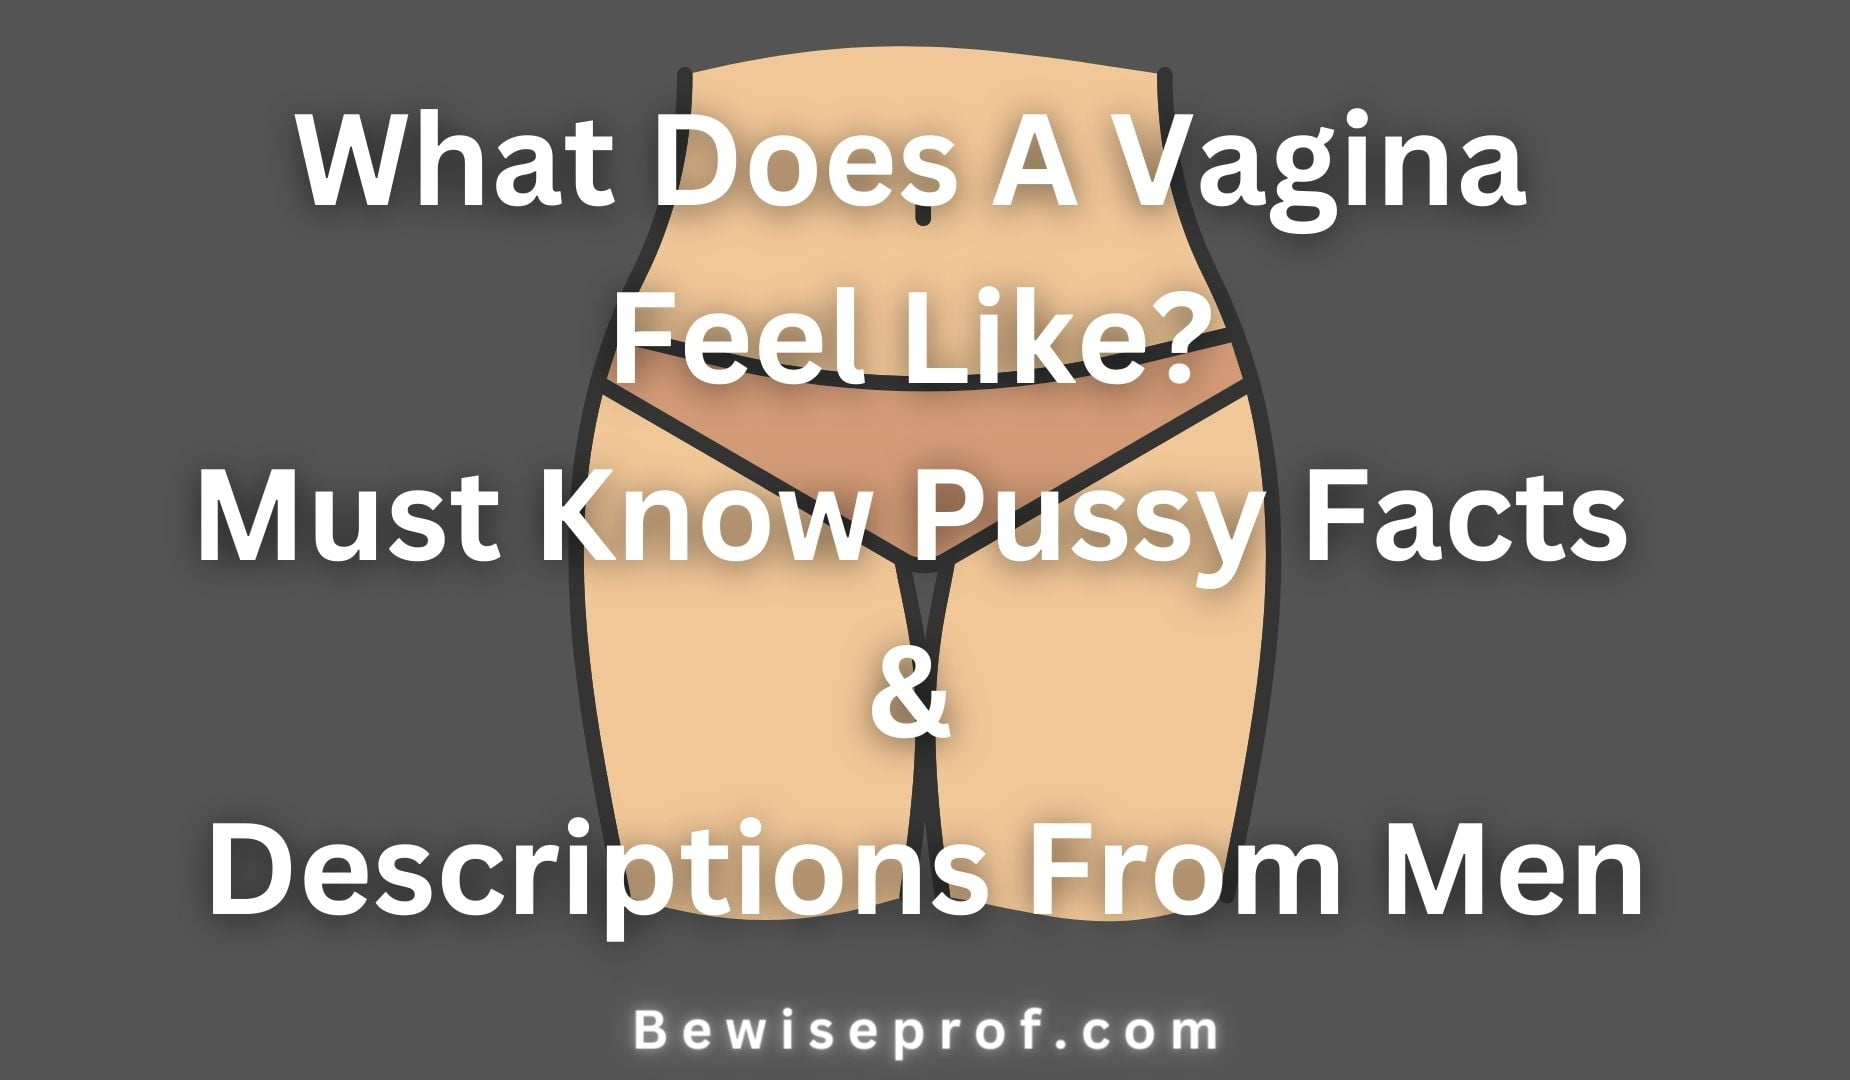 What Does A Vagina Feel Like? Must Know Pussy Facts & Descriptions From Men